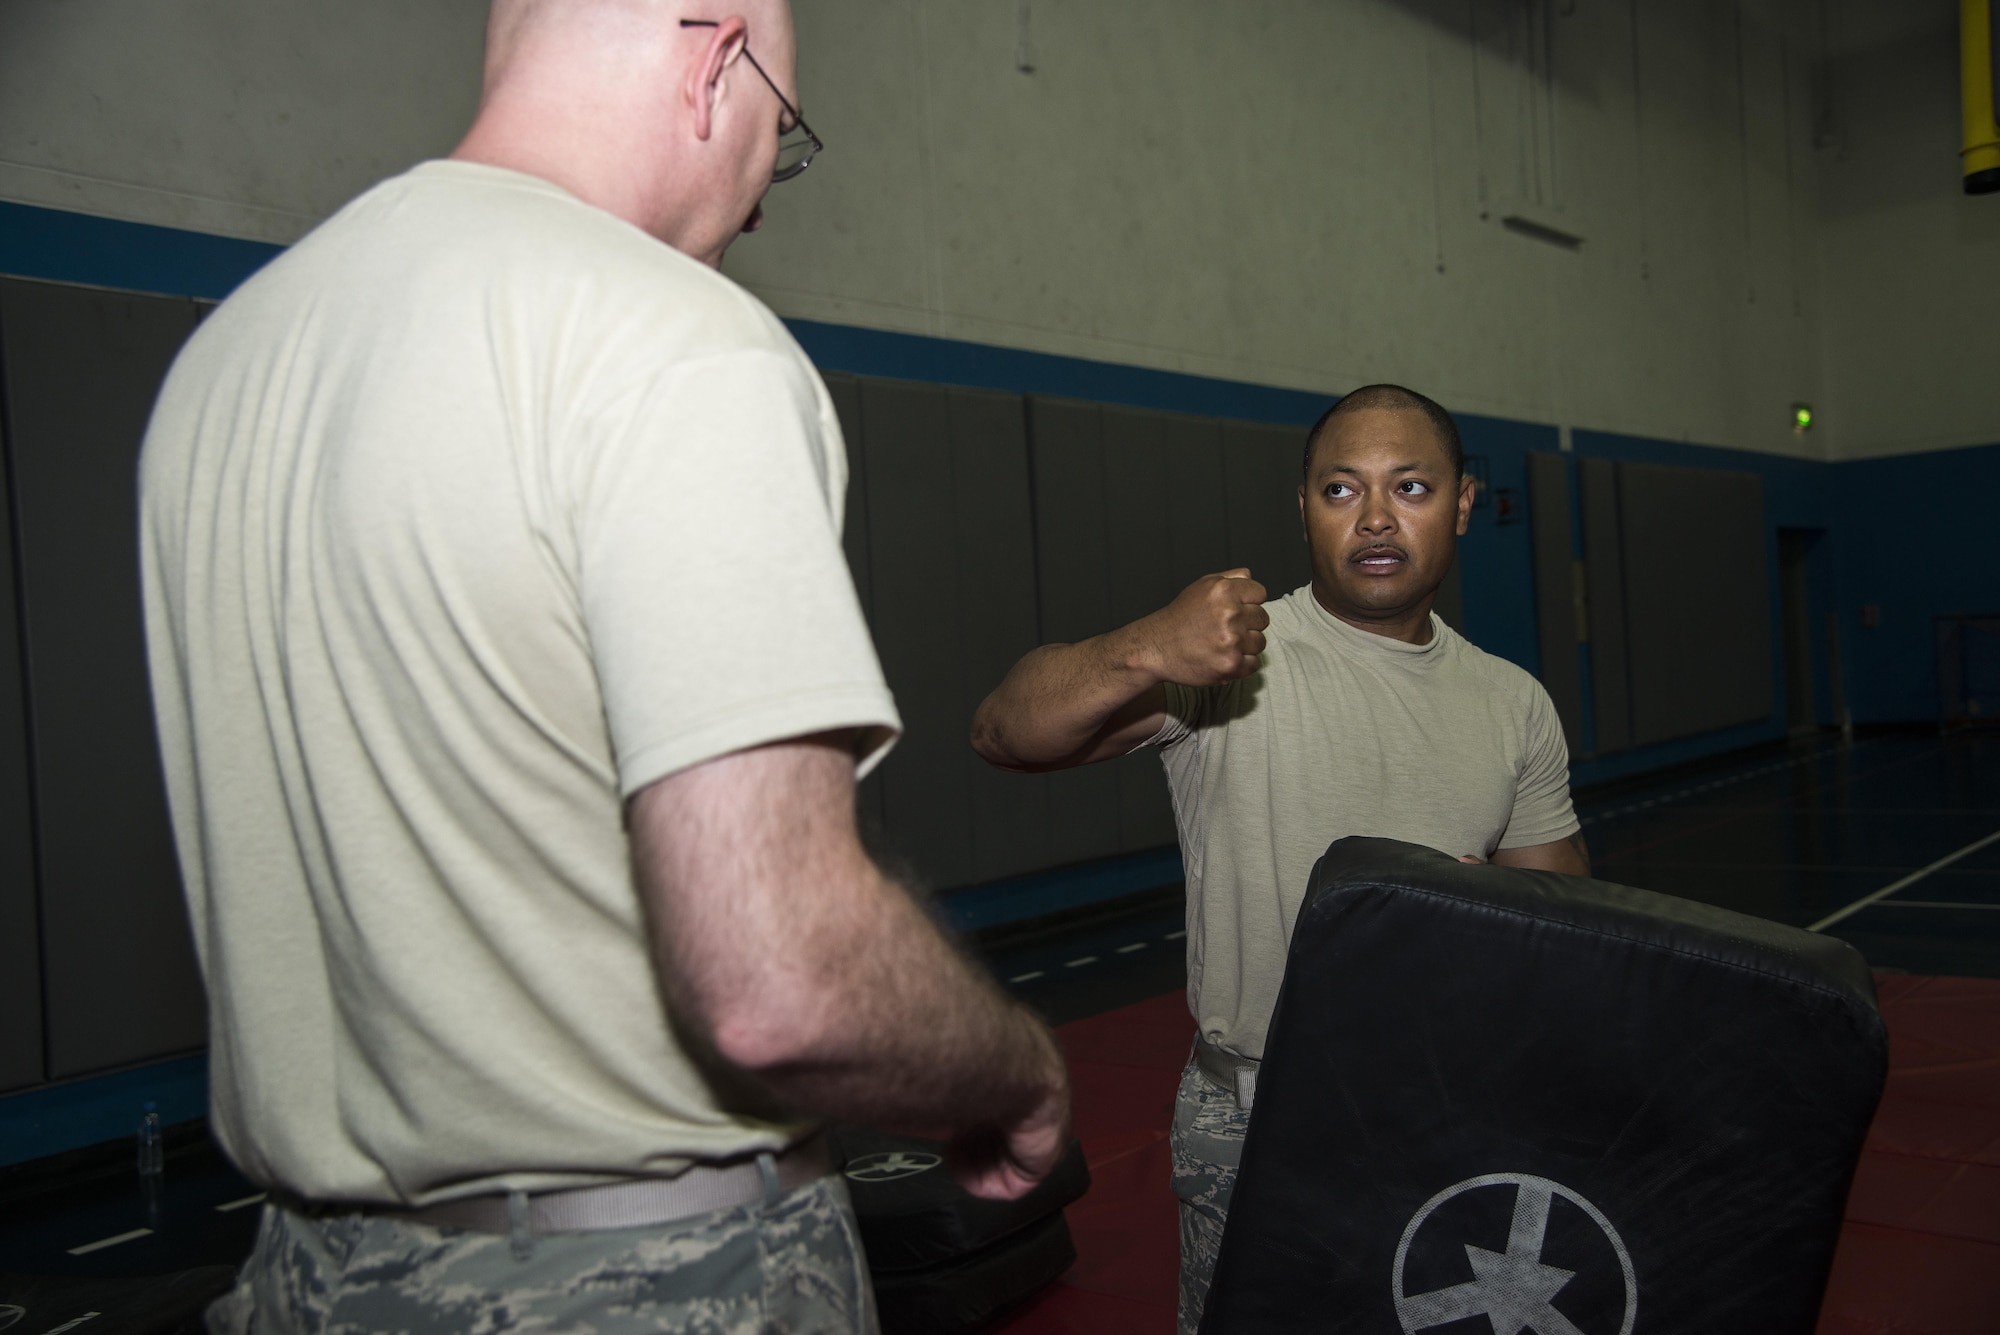 Tech Sgt. Chalom Pittman, Combined Air and Space Center force protection liasion officer and Check Six program manager, instructs on proper technique when throwing jabs and punches to Master Sgt. Rodney Hattery, 379th Expeditionary Operations Support Squadron weather flight lead, during a combatives class at the Blanchard-Preston Complex gym May 29, 2015 at Al Udeid Air Base, Qatar. Bi-weekly, Airmen of the 379th Expeditionary Security Forces Squadron instruct members on non-lethal ways to defend themselves. (U.S. Air Force photo by Tech. Sgt. Rasheen Douglas)